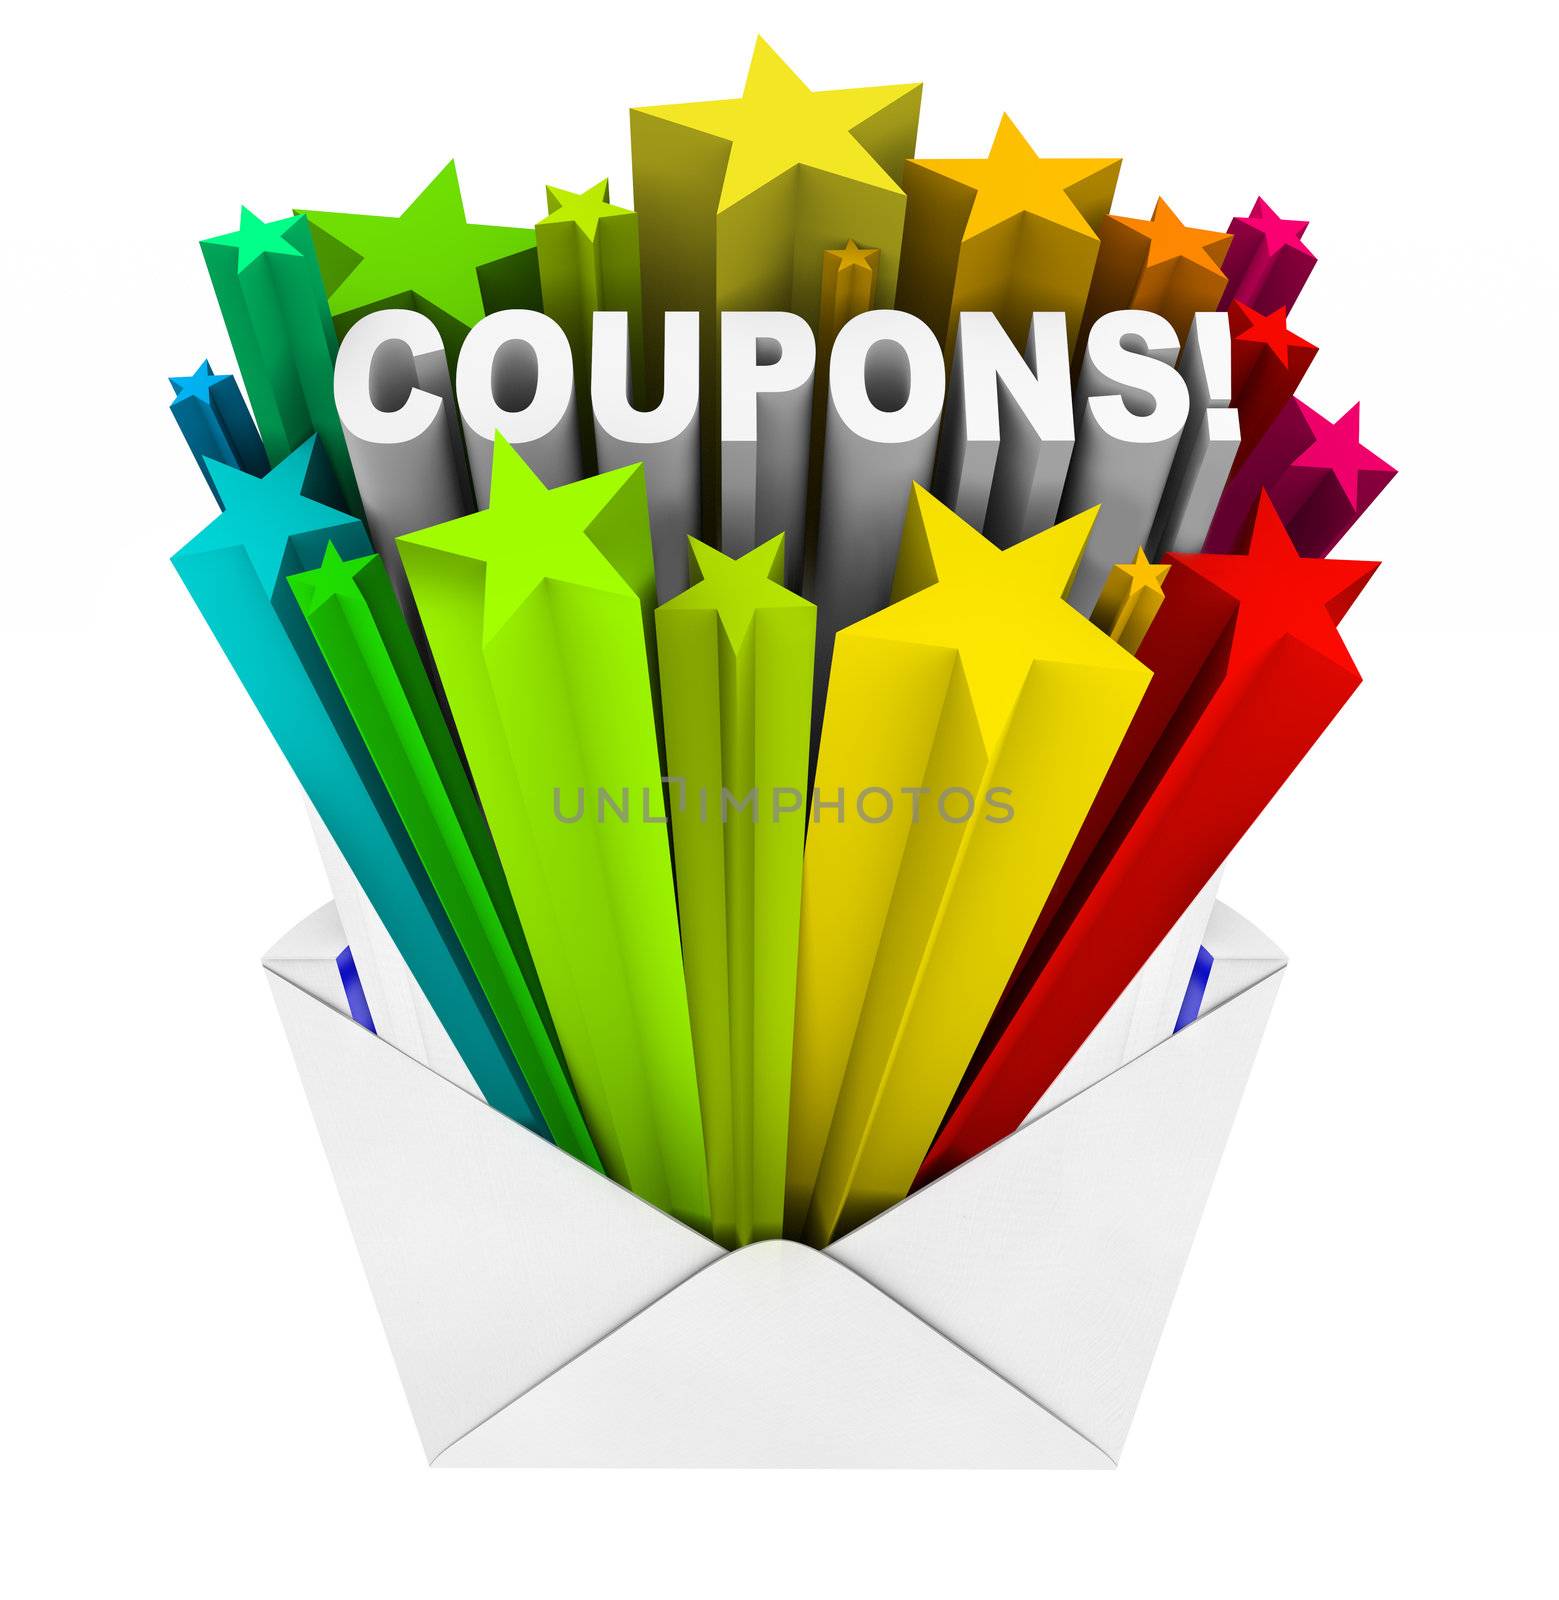 Coupons in Envelope Save When You Buy and Pay Less by iQoncept